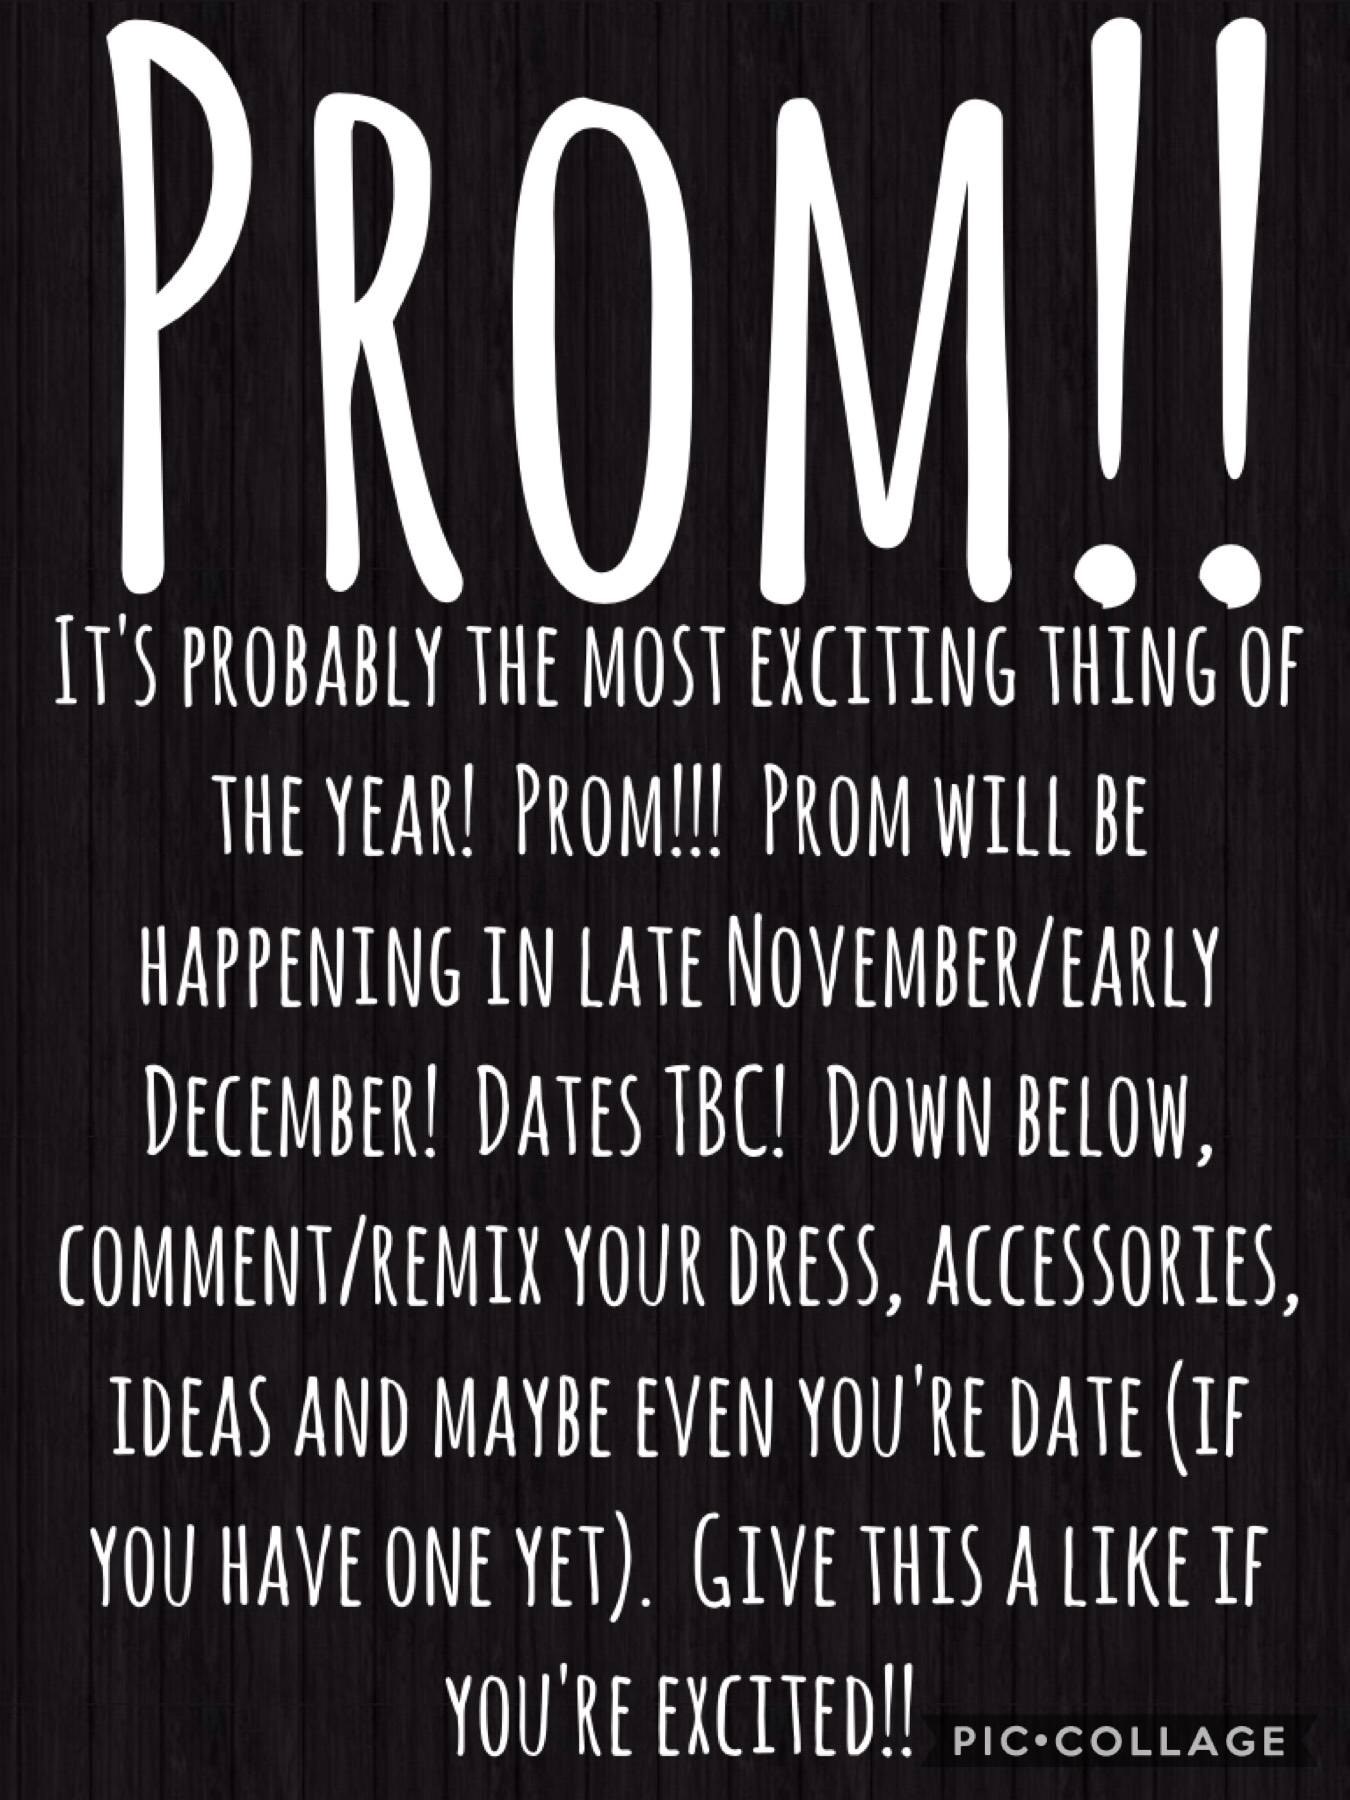 Tap!!
I'm so sorry I haven't been posting😁😁
If you want you can do your own dorm!
I don't know about you but I'm super excited for prom!!
What are some ideas for themes?